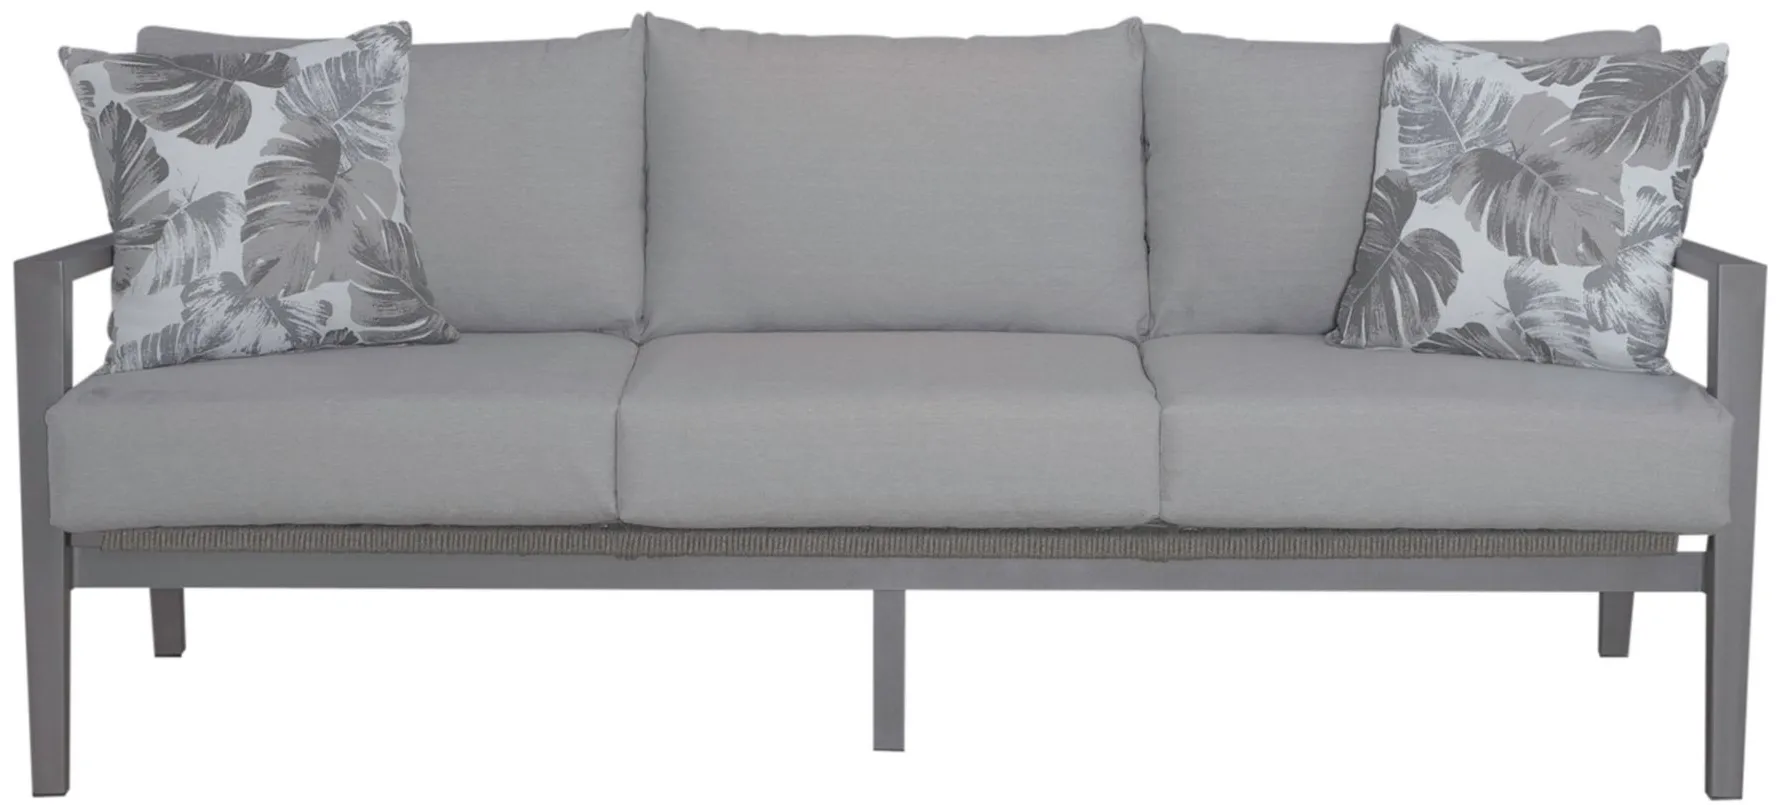 Plantation Key Outdoor Sofa in Granite Finish by Liberty Furniture